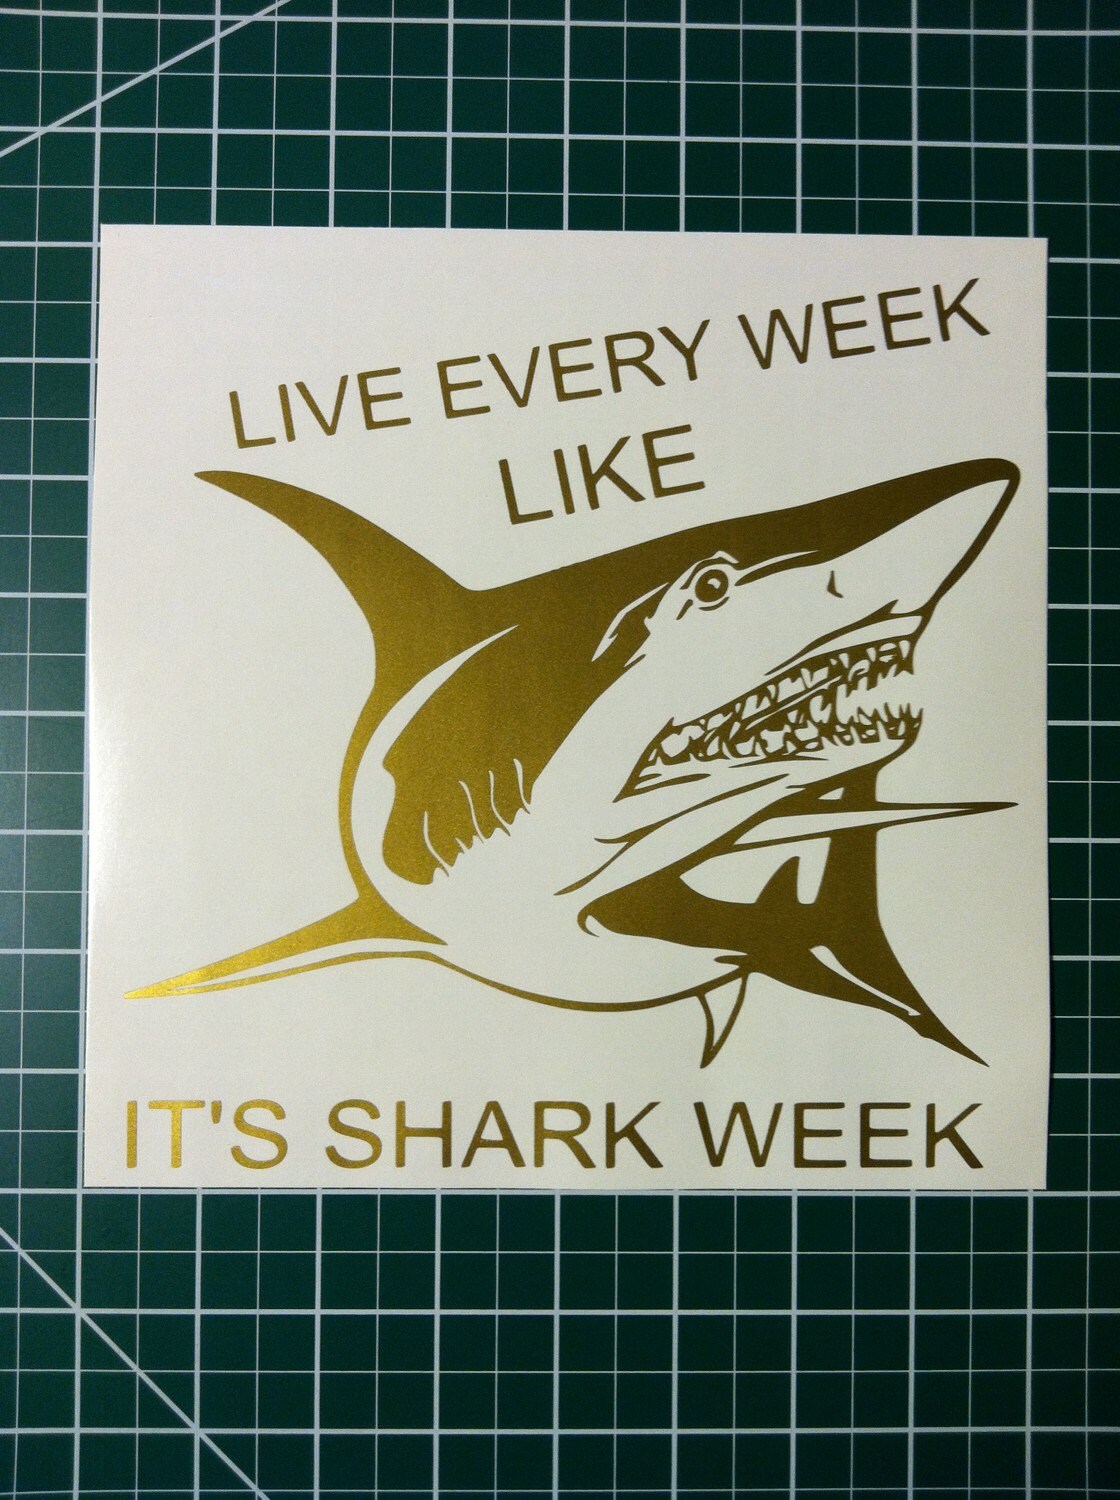 live-every-week-like-its-shark-week-wall-decal-car-by-decals4us